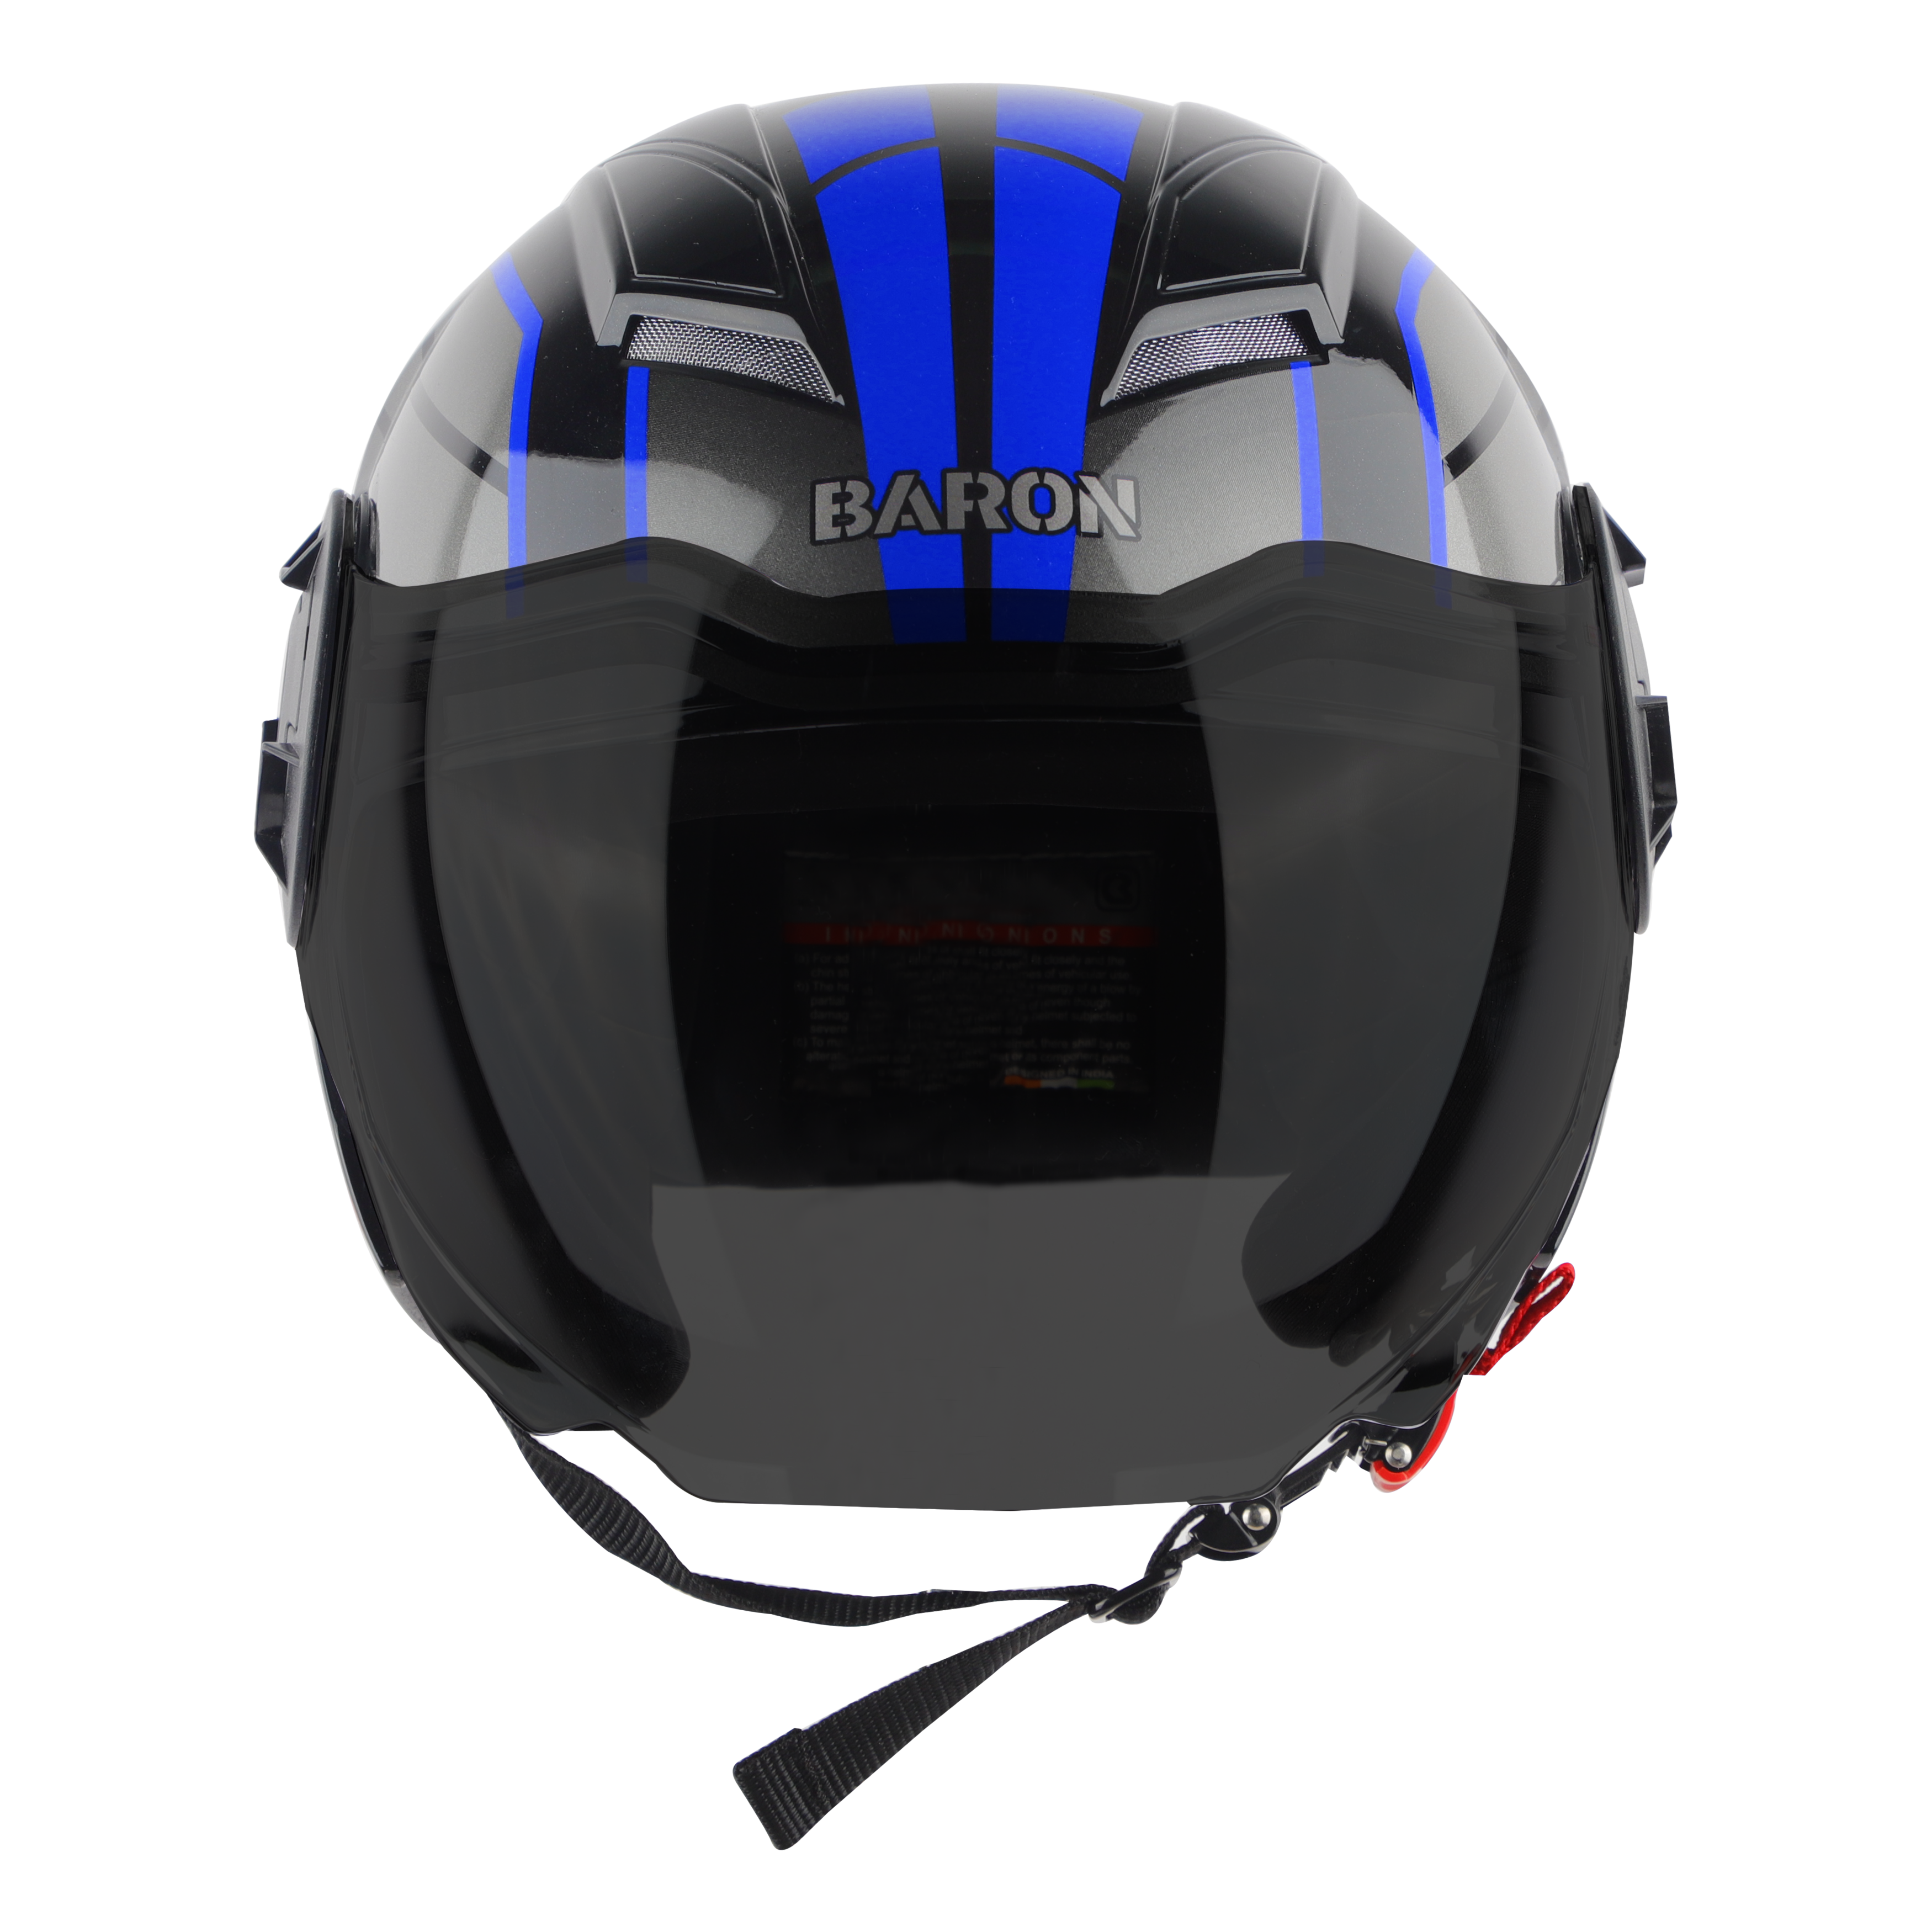 Steelbird SBH-31 Baron ISI Certified Open Face Helmet For Men And Women (Glossy Black Blue With Smoke Visor)